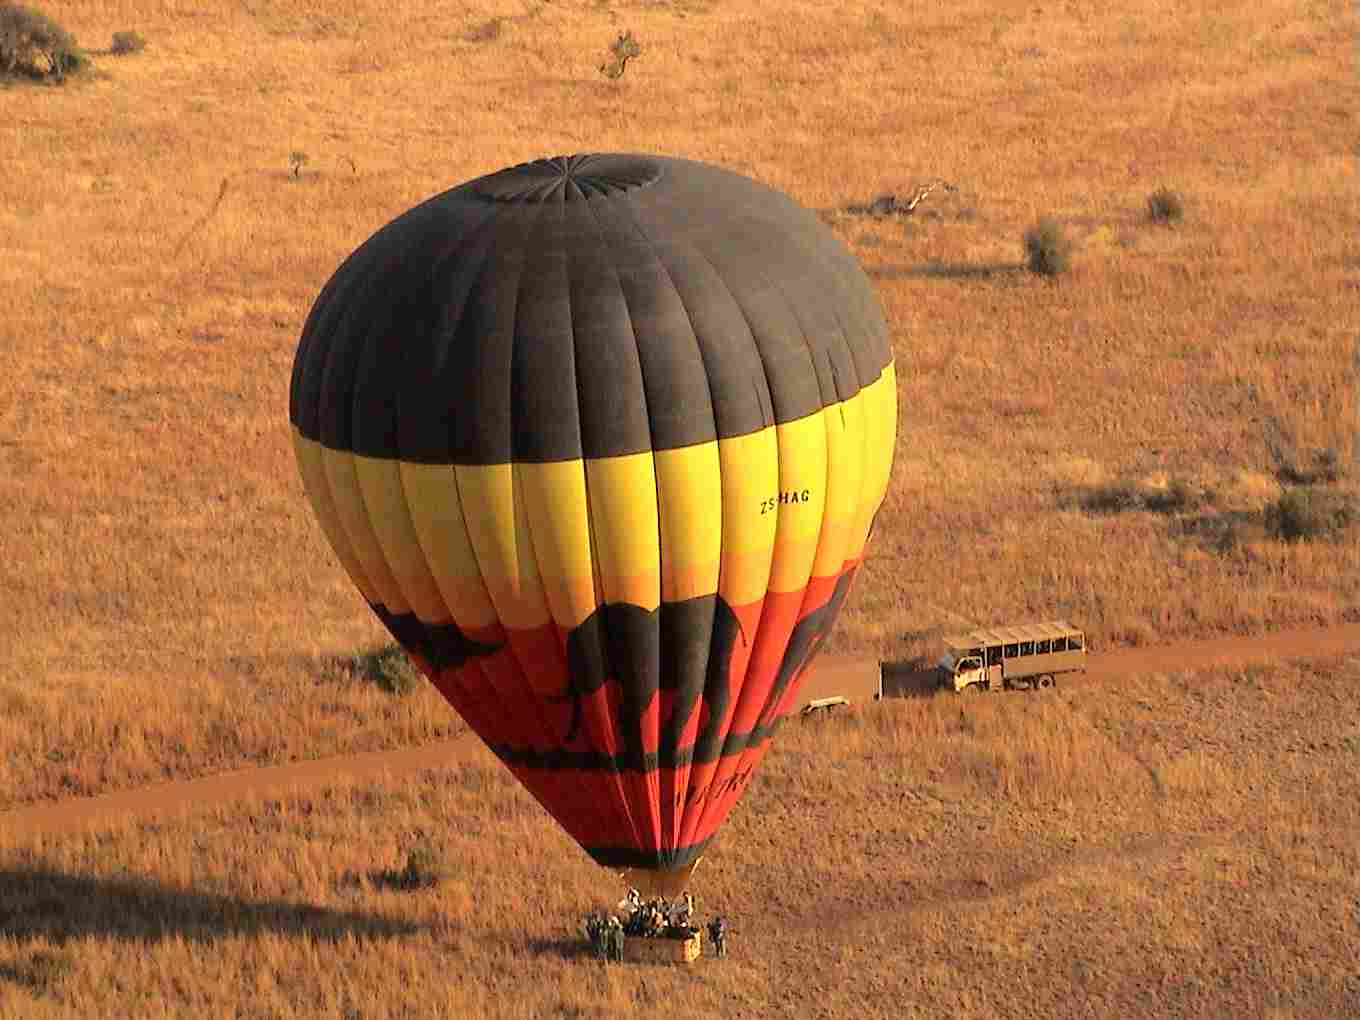 From 'our' balloon we watch as the accompanying balloon touches down.  Photo by FG.